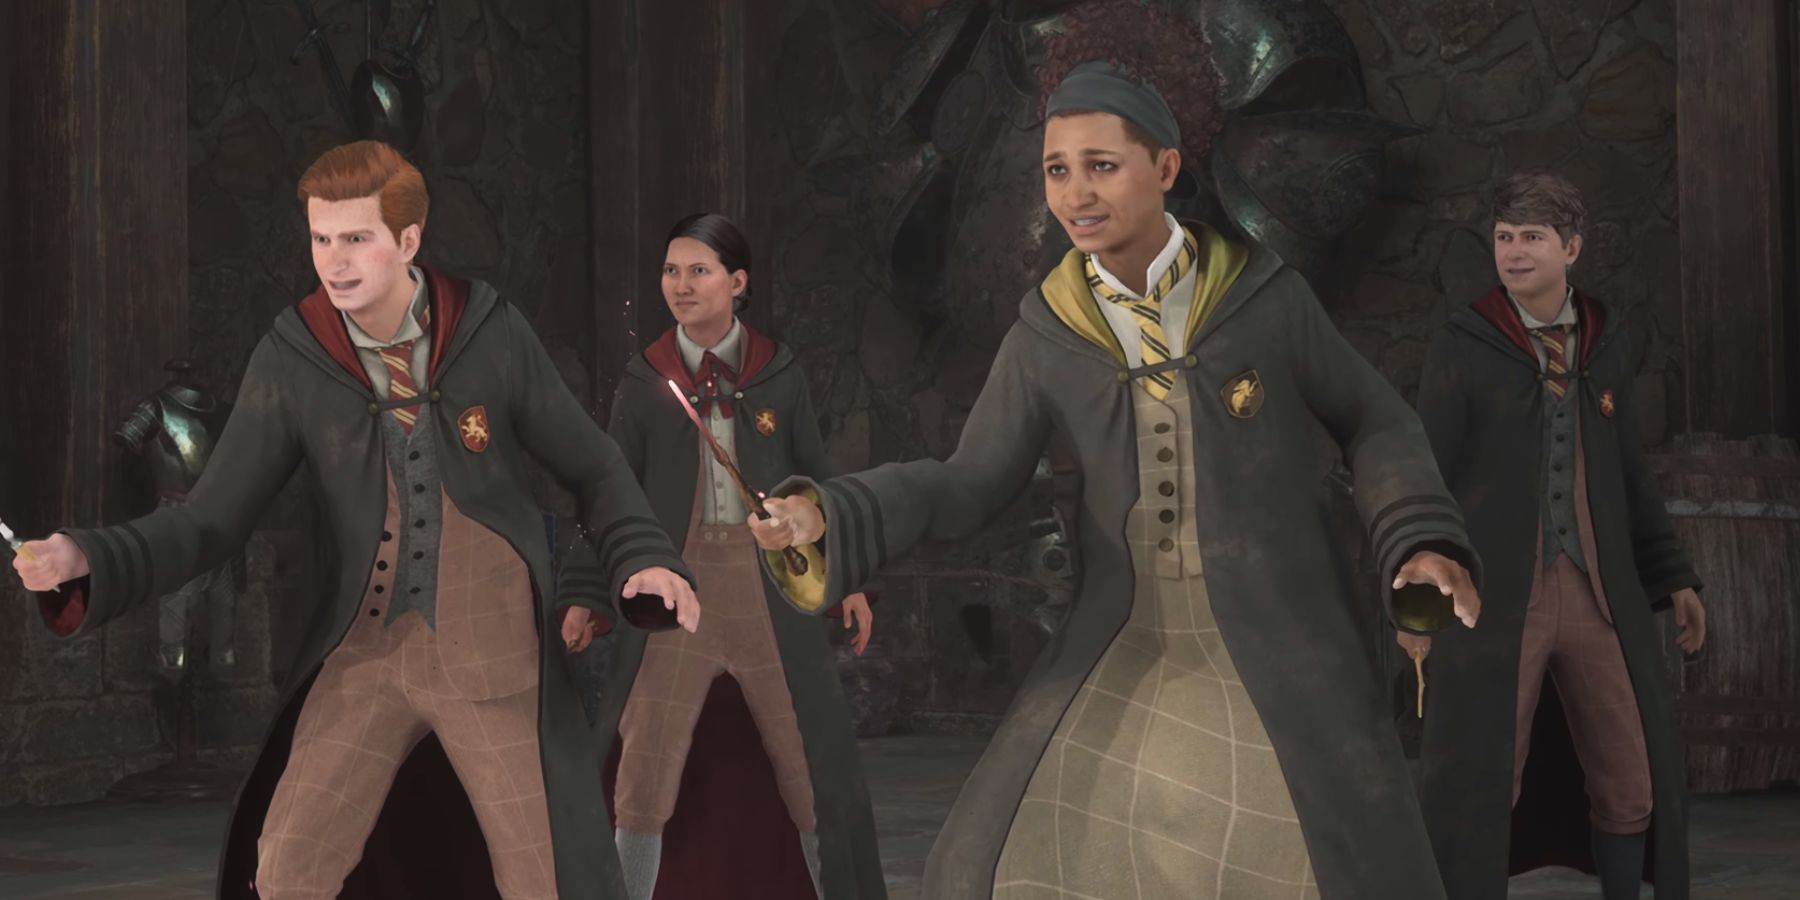 The Next Hogwarts Legacy Doesn't Have to be a True Sequel